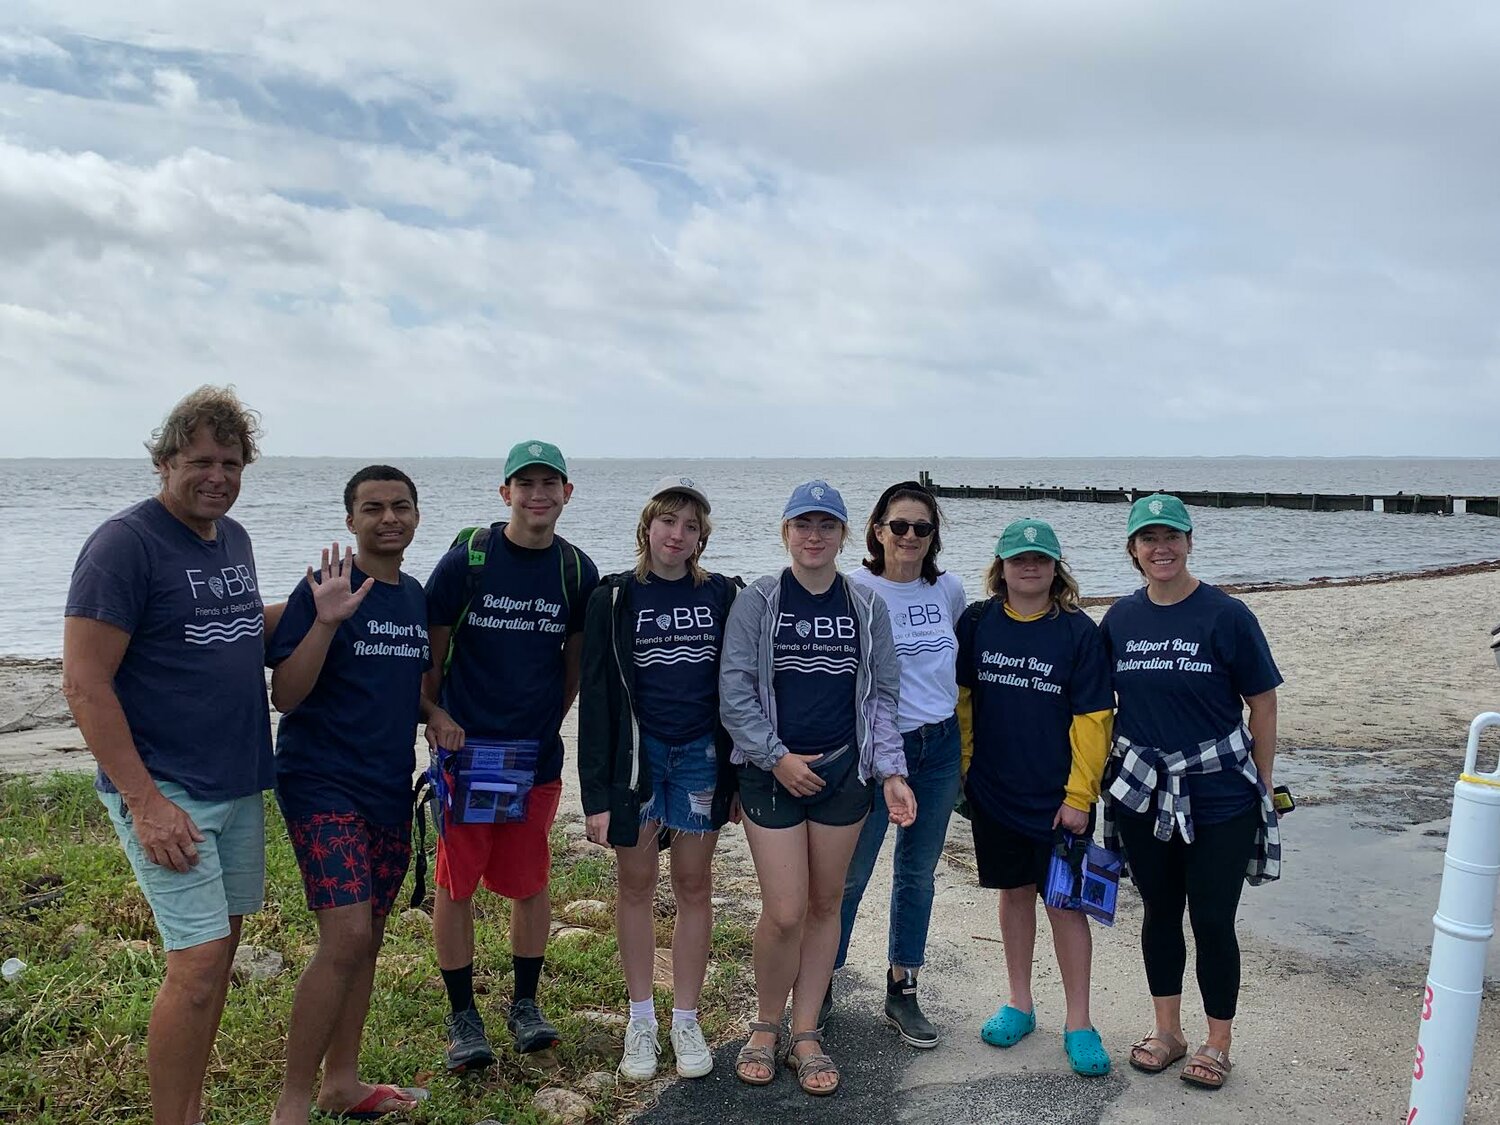 Four youngsters from the Boys & Girls Club of the Bellport Area joined interns from Friends of Bellport Bay to plant 60,000 oysters on bulkheads in the bay as part of an environmental education program funded by the David M. Duffy Jr. Foundation.